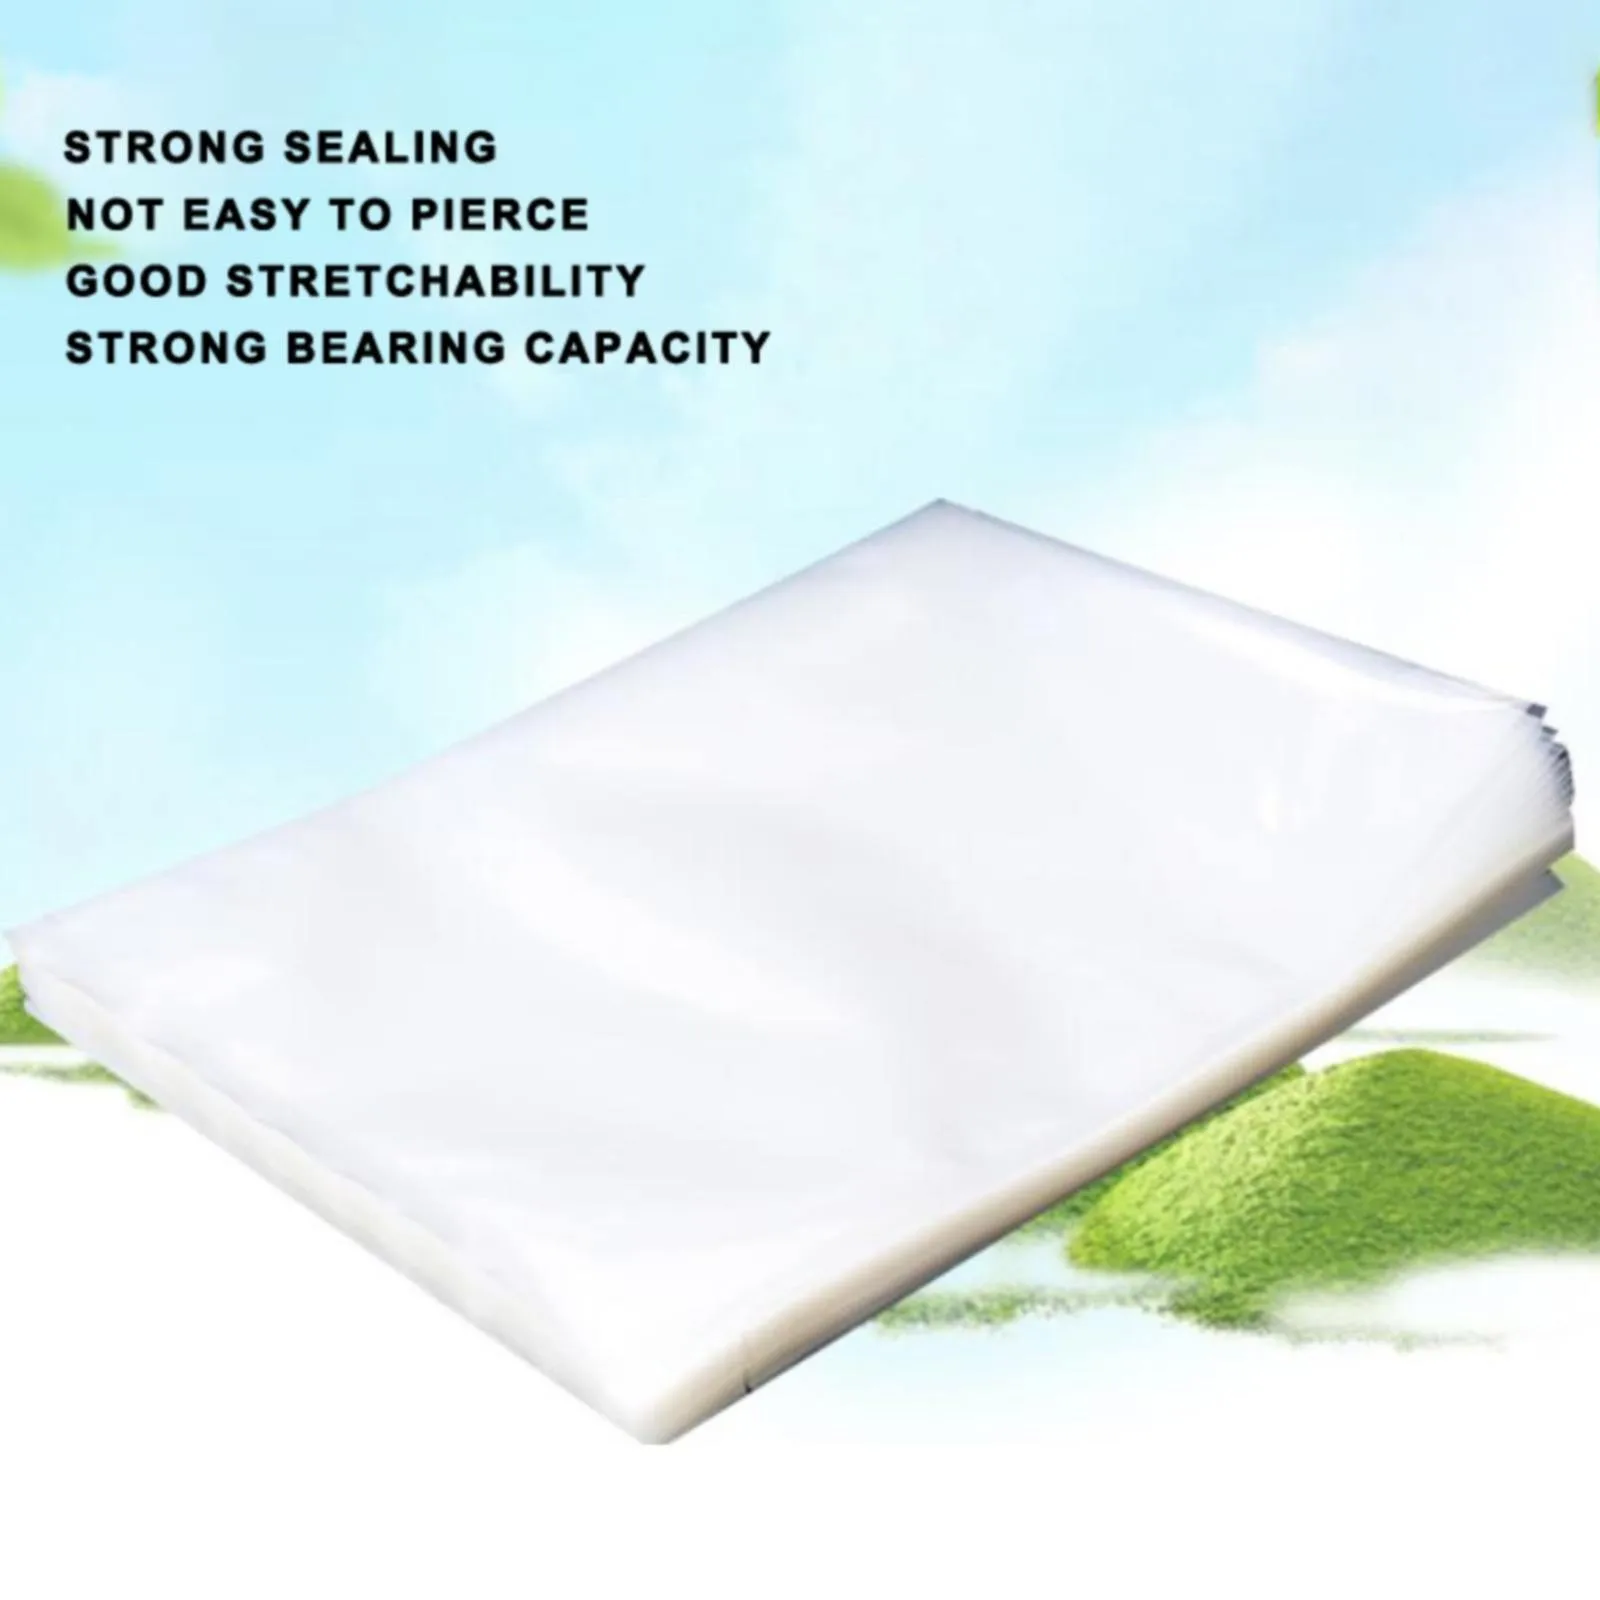 https://ae01.alicdn.com/kf/S4280af951c1547c7a570714624a06dfeR/Food-Storage-Bags-Gallon-50-Pack-Freezer-Bags-Resealable-Bags-Heavy-Duty-Reusable-White-Dry-Storage.jpg